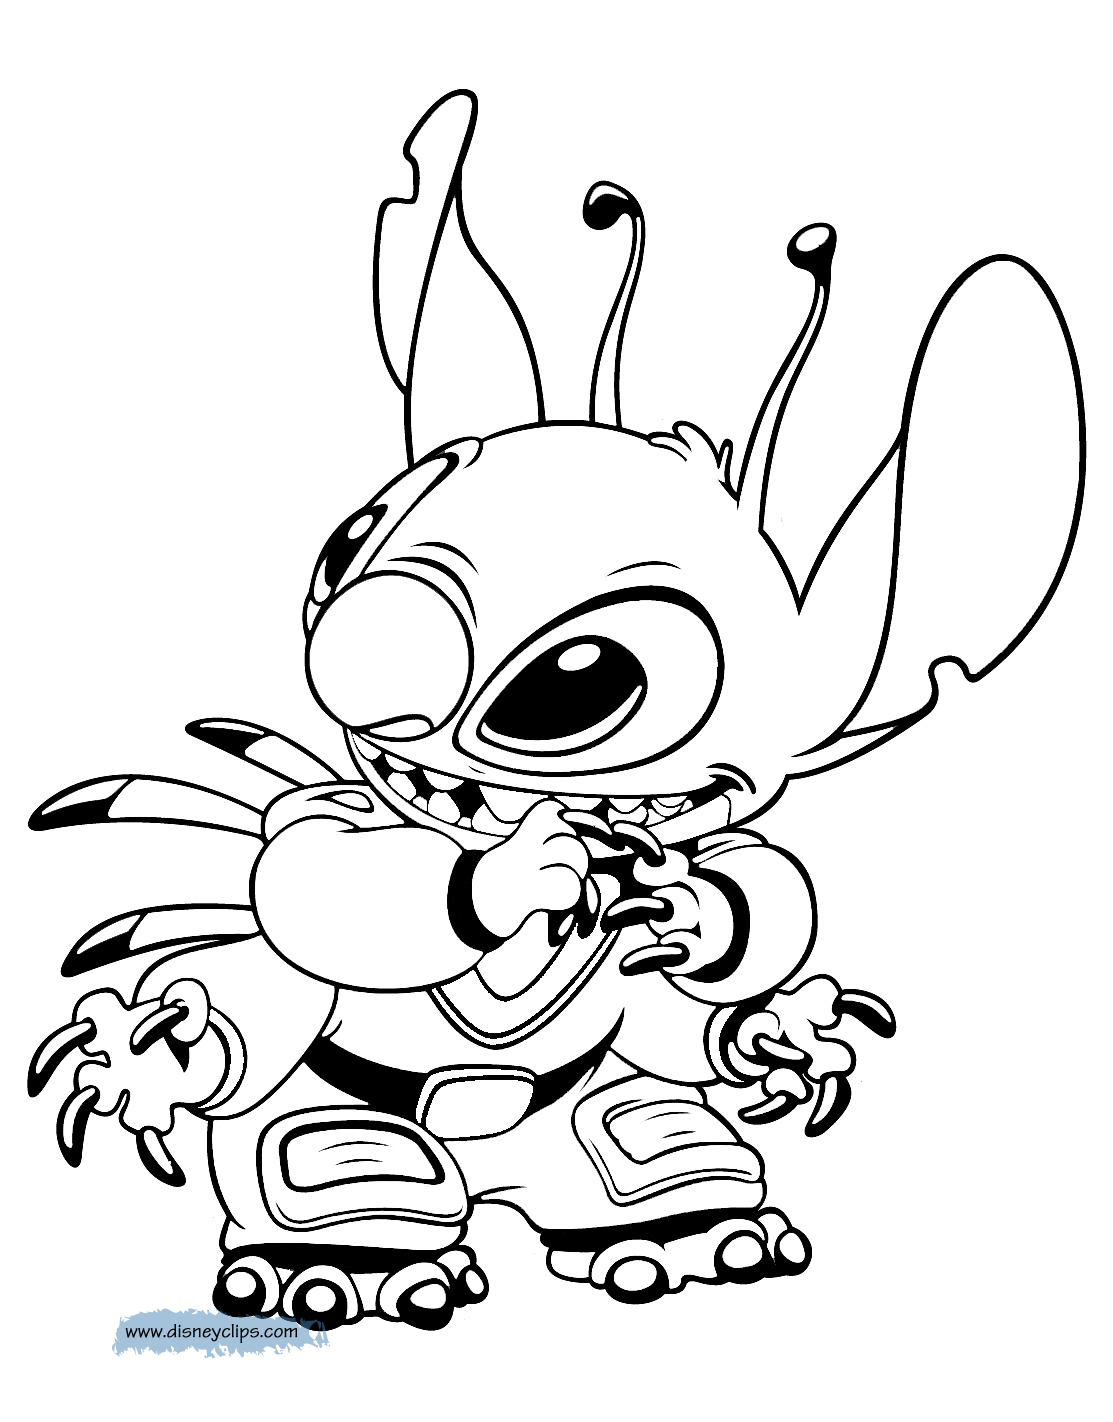 Lilo and Stitch Coloring Pages 2   Disneyclips.com